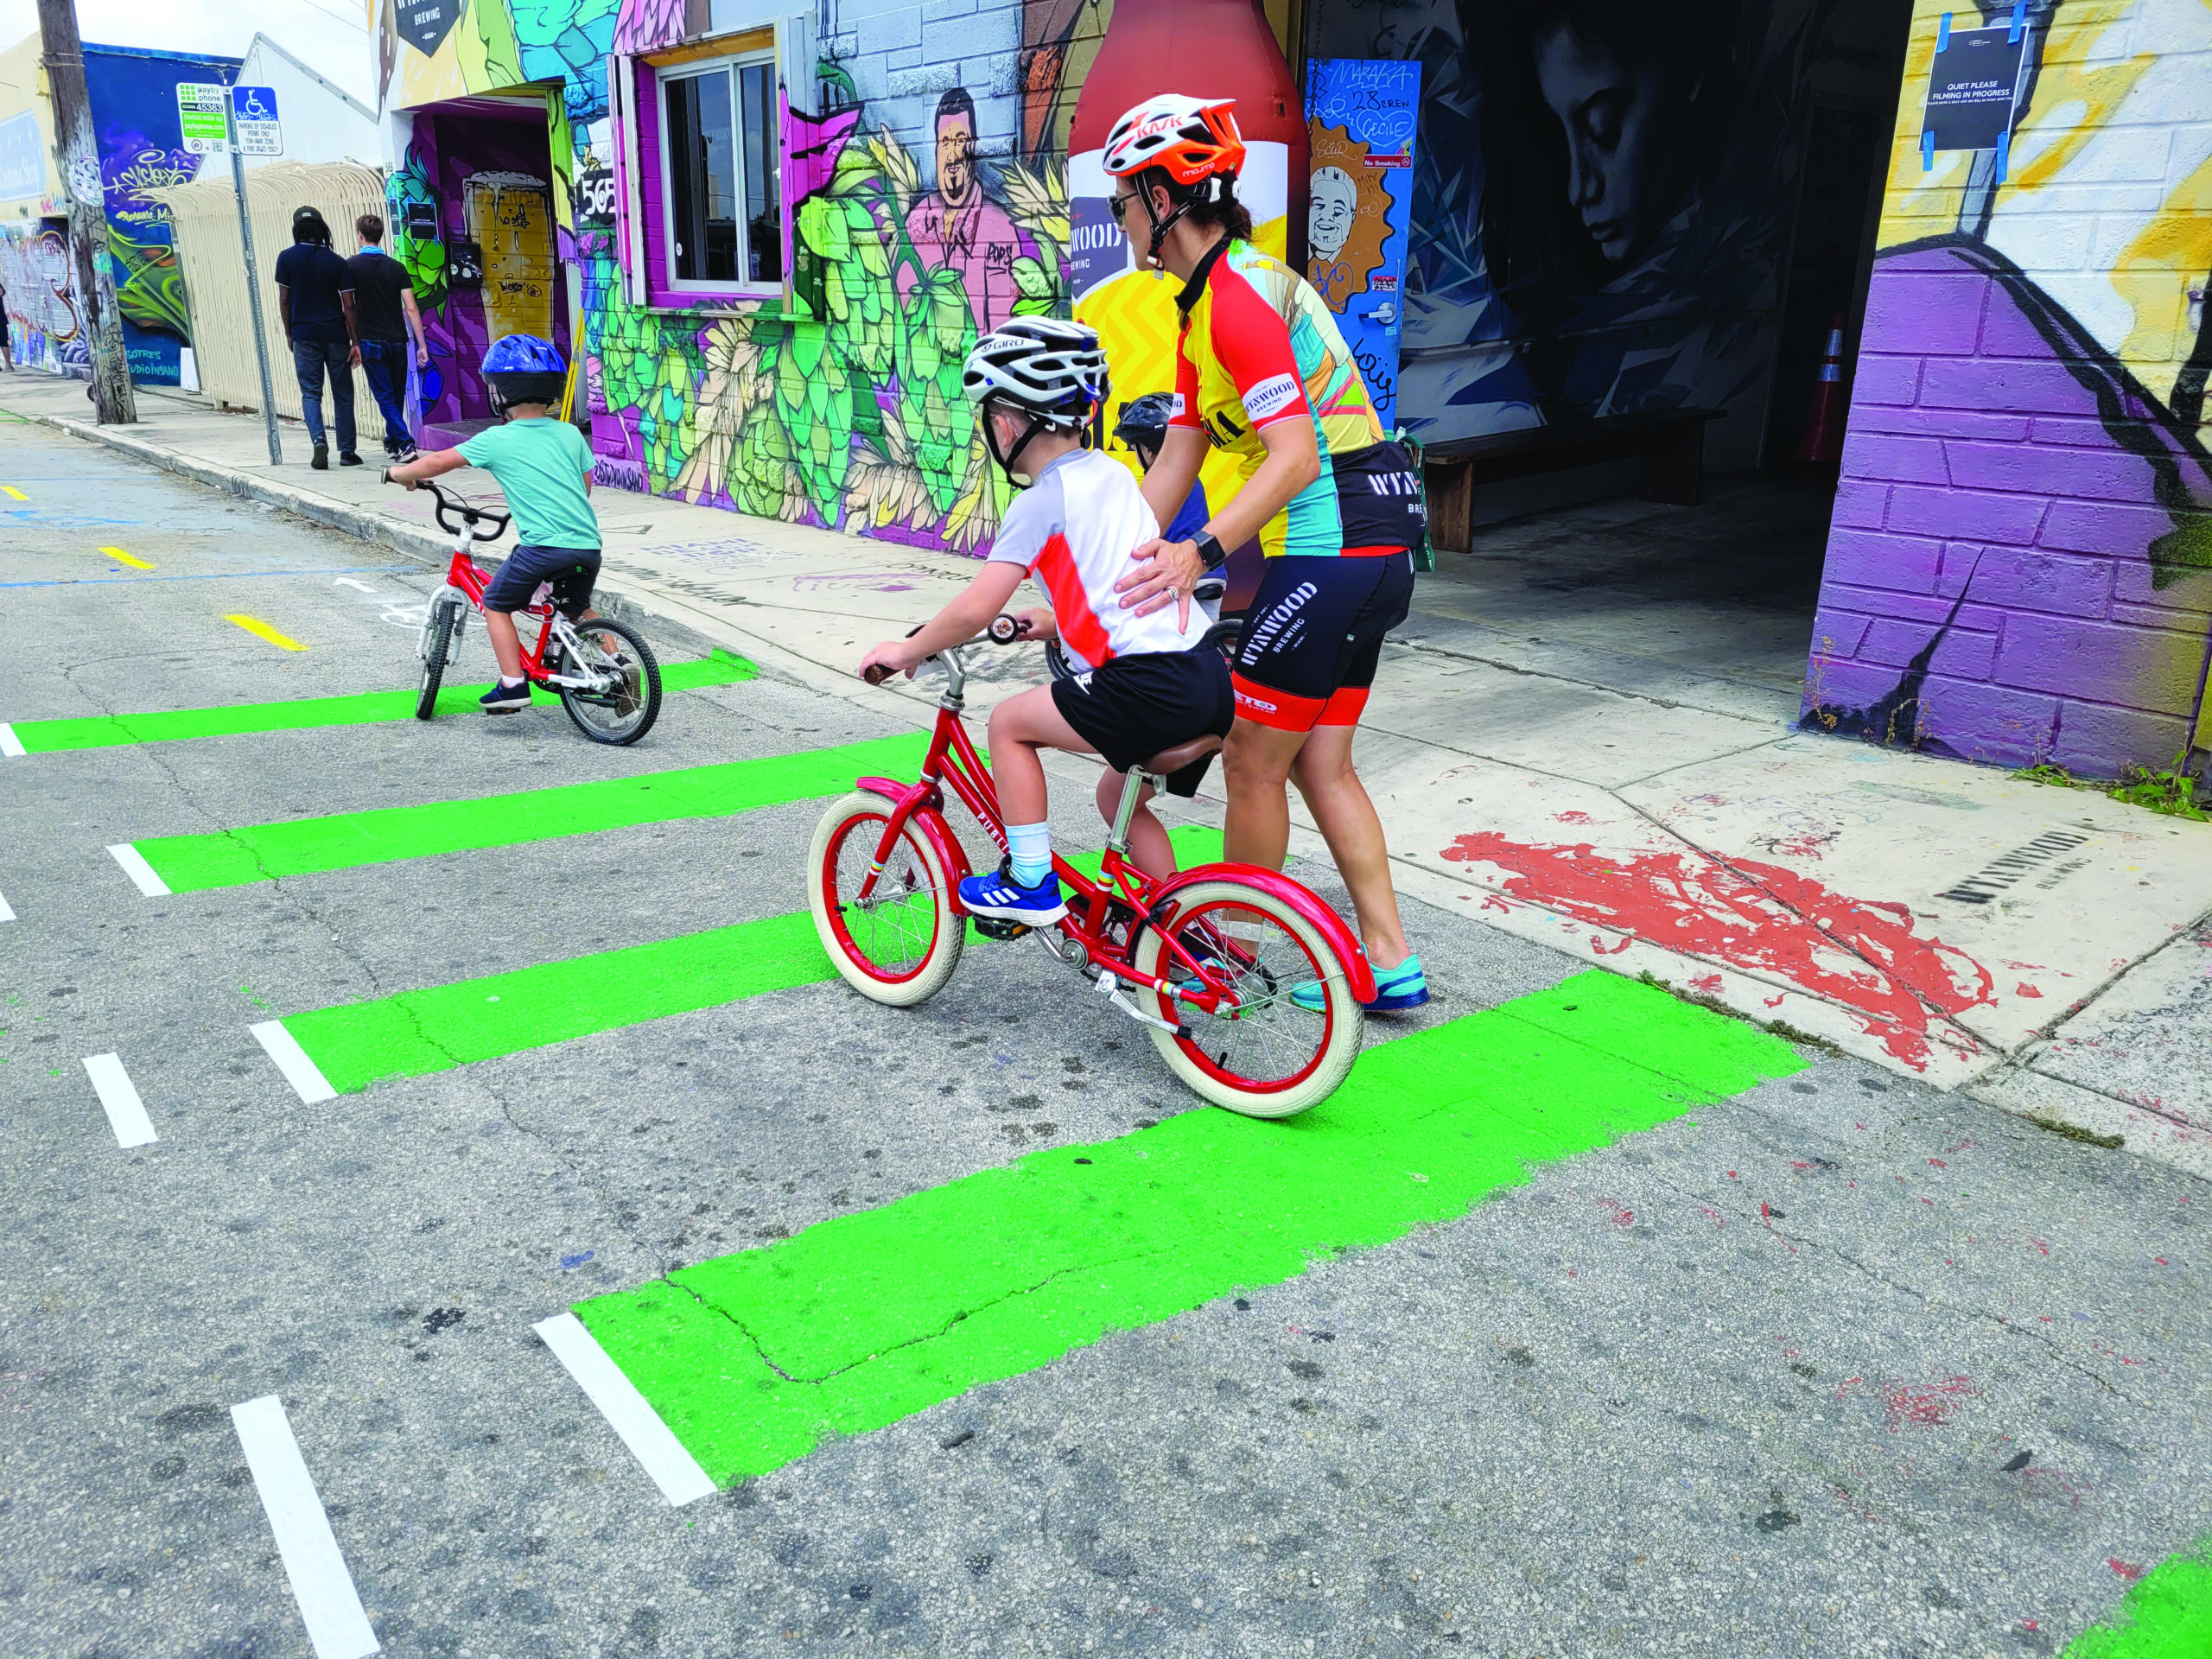 BikeSafe co-founder, Dr. Mickey Witte, assists young riders with balancing on a pop-up, low-cost demonstration bike lane created by the program. The wheelchair-accessible parking zone was recreated on the other side of the street during the event.